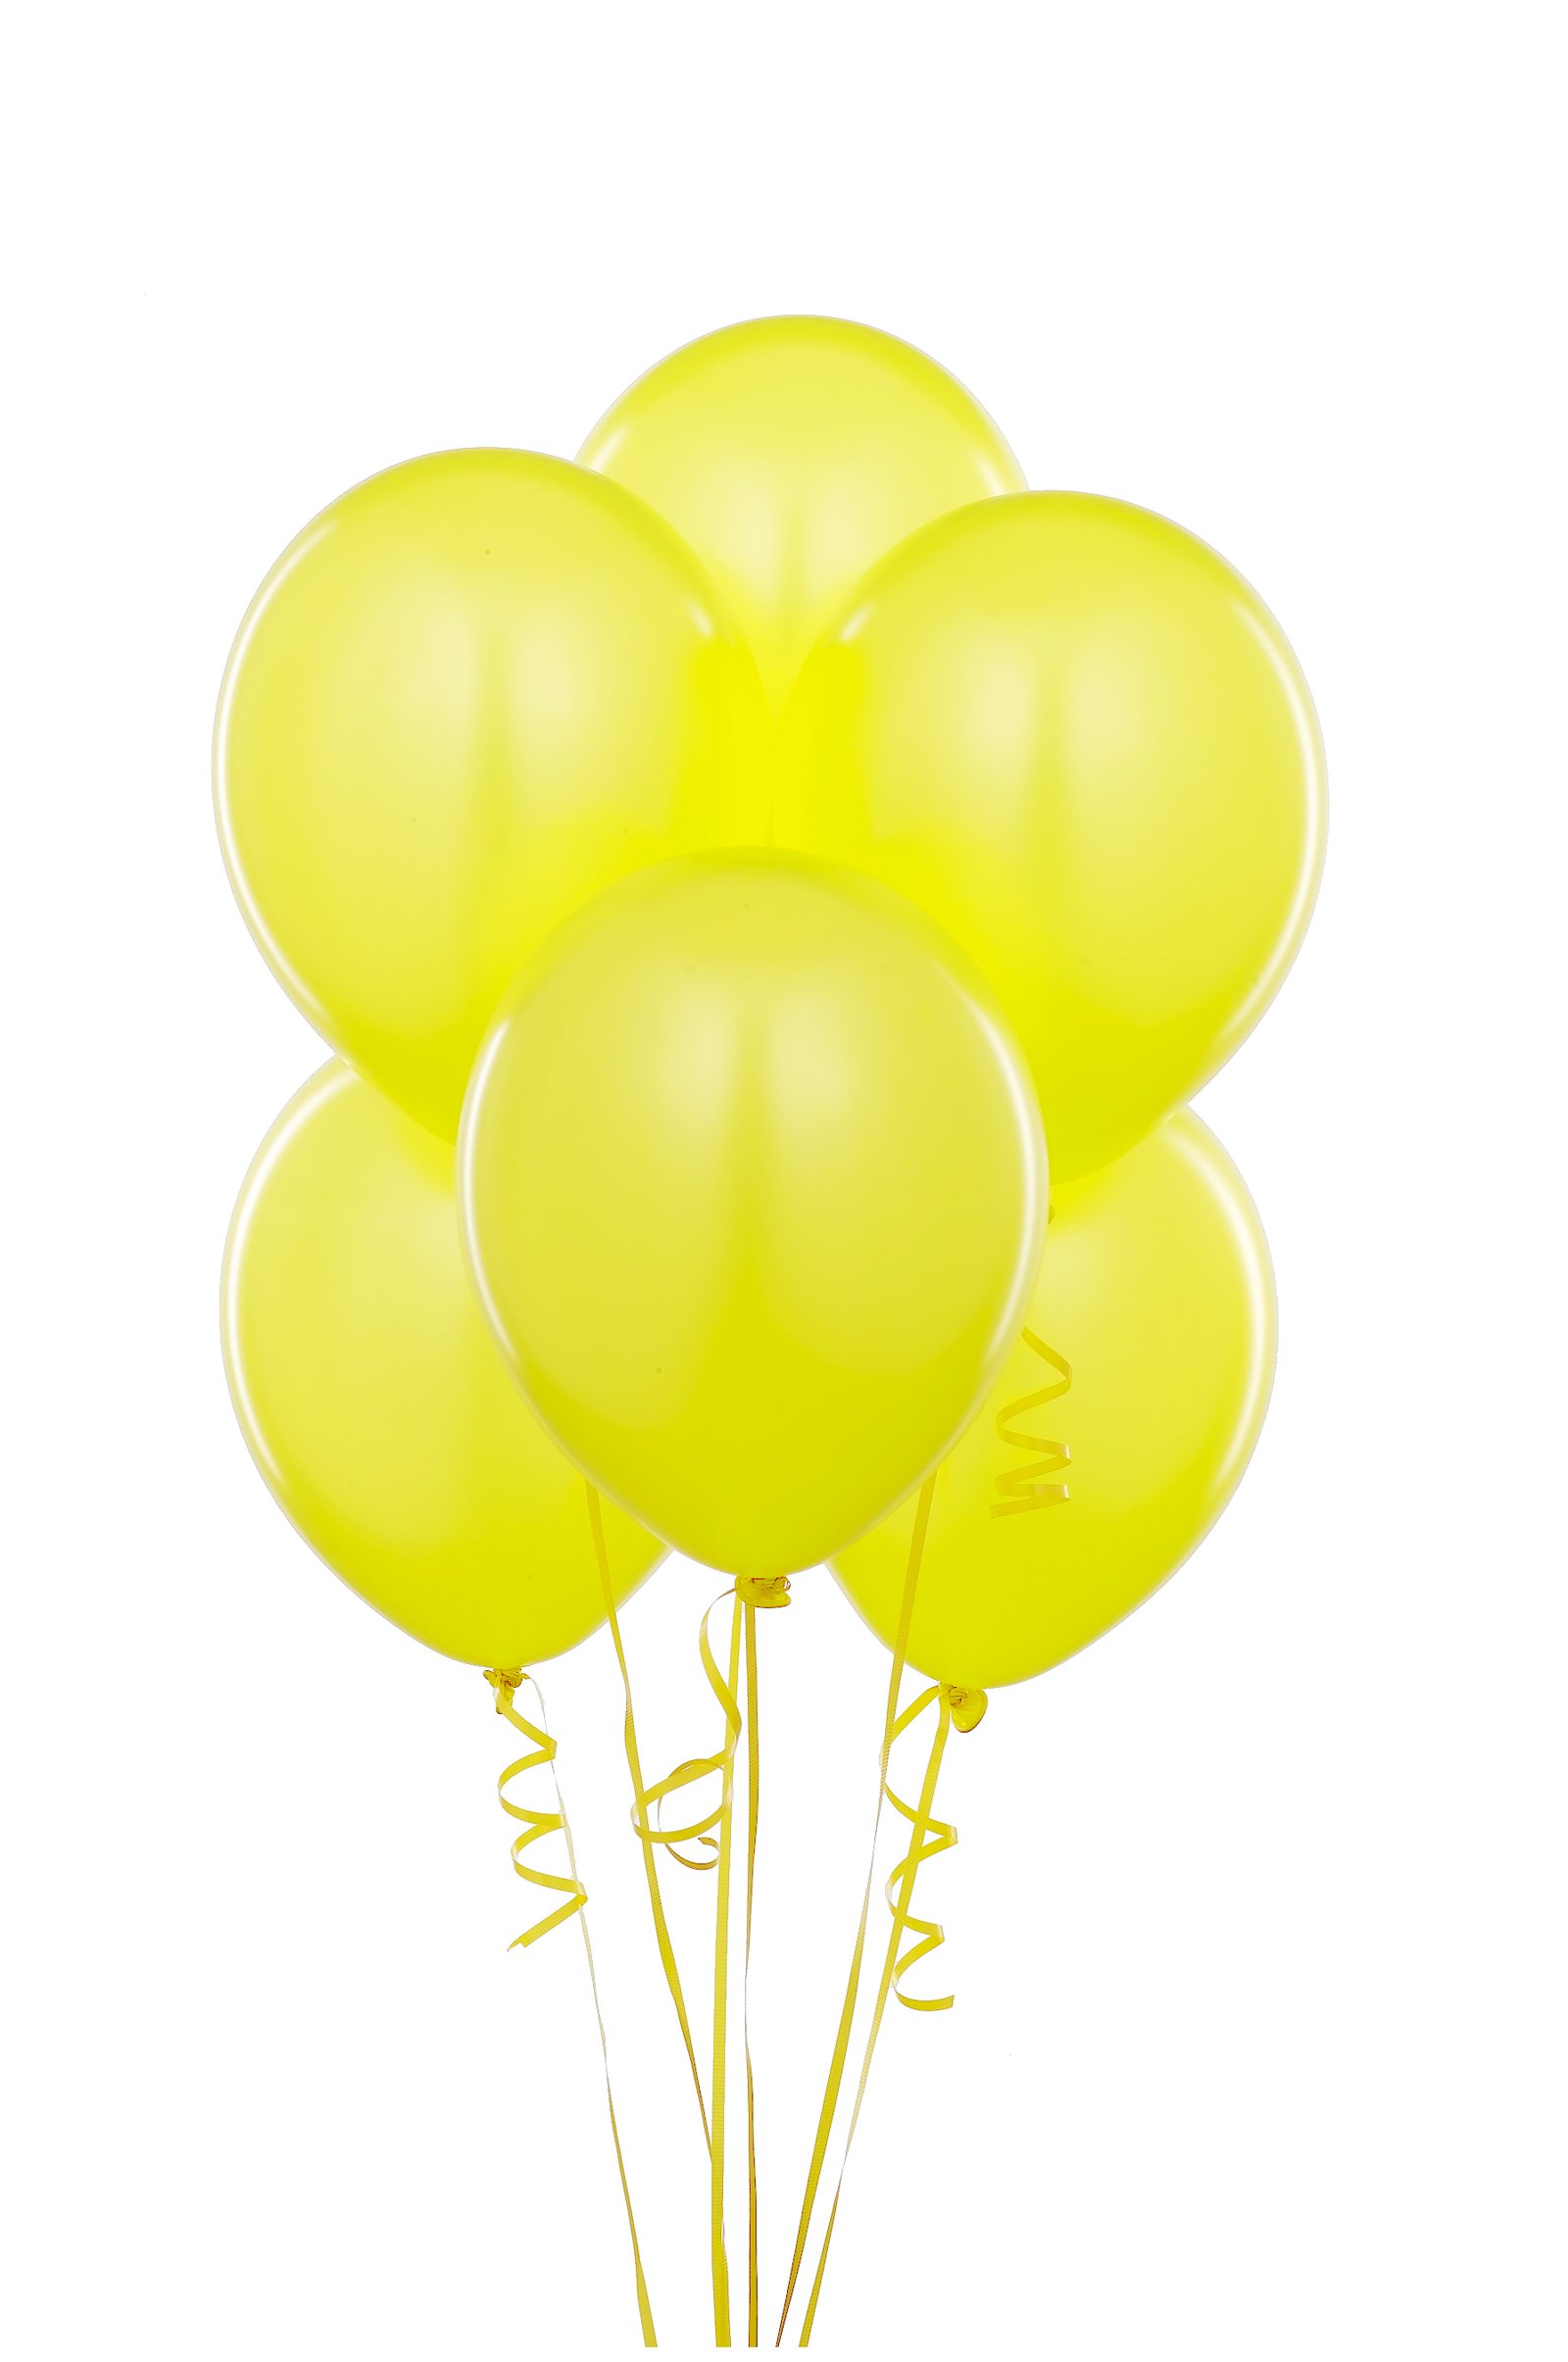 Free Yellow Balloon Cliparts, Download Free Clip Art, Free.